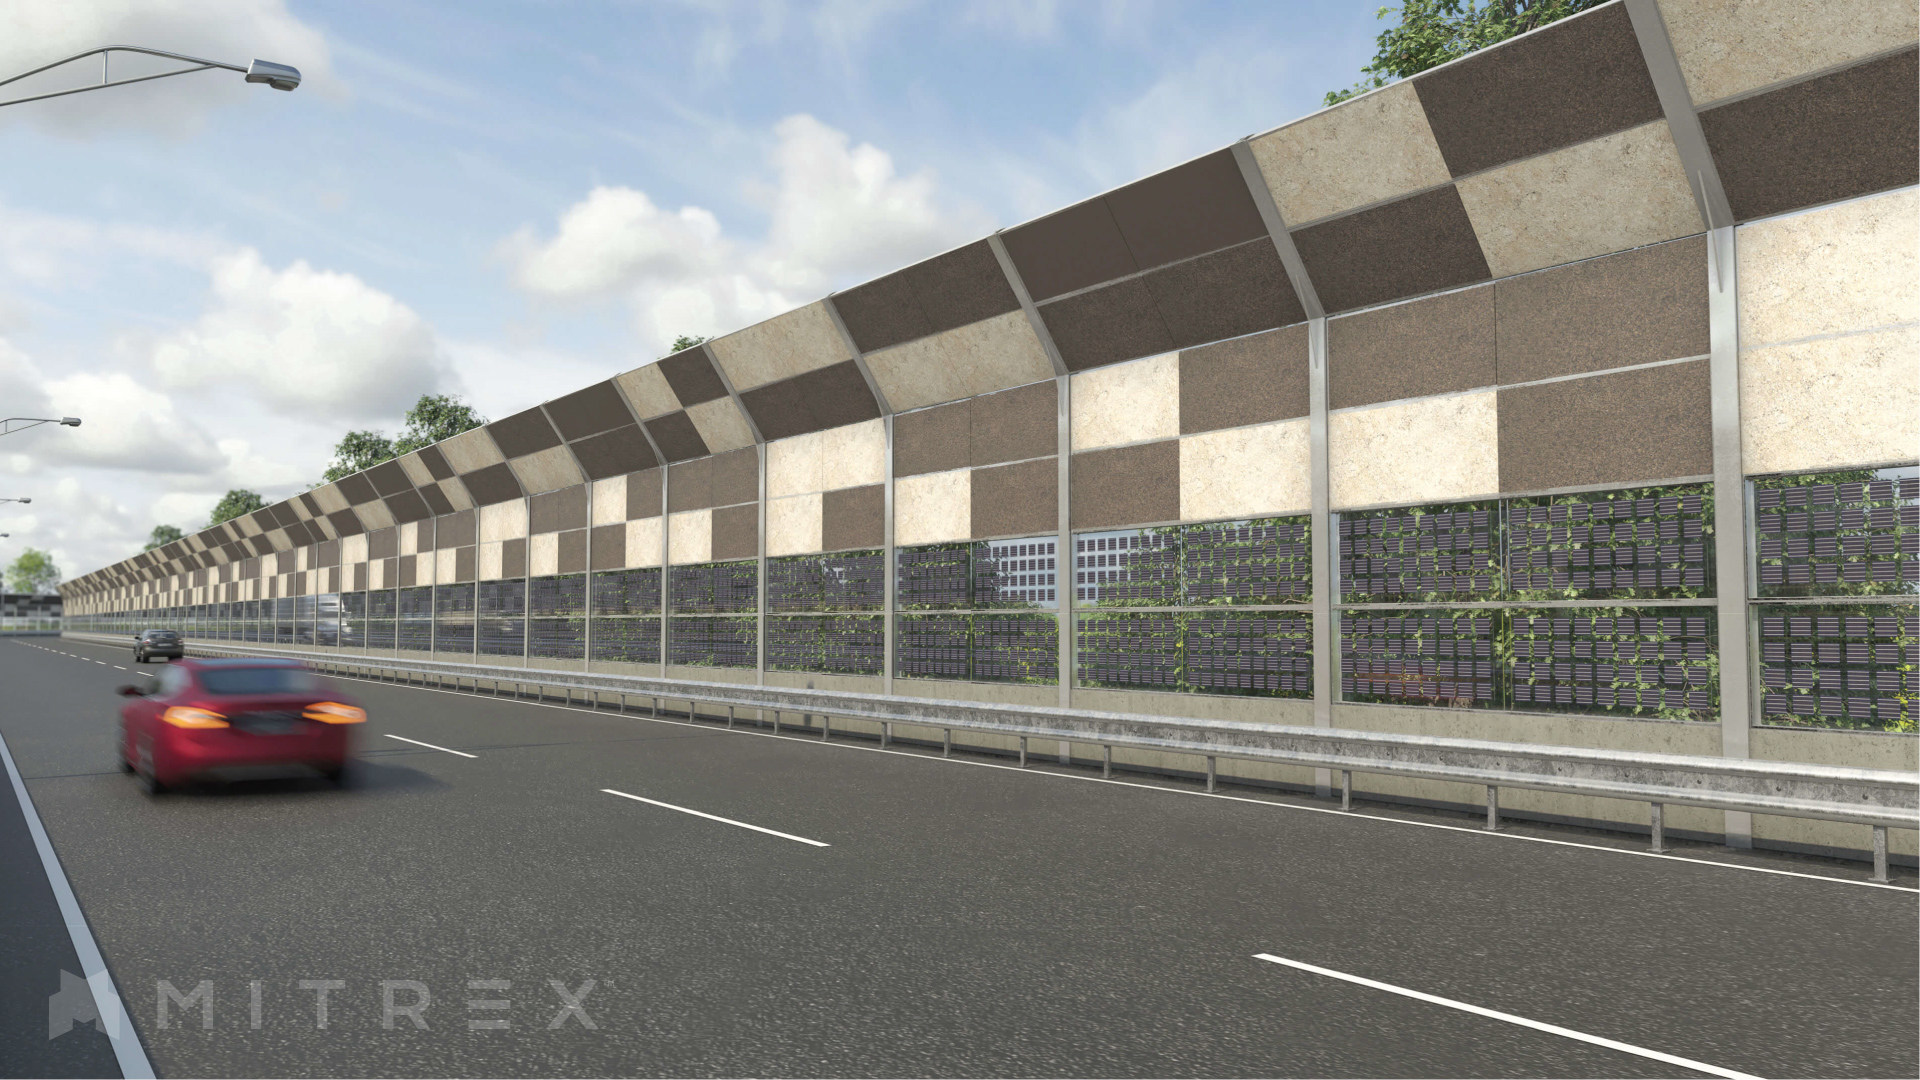 Mitrex Integrated Solar Technology Sustainable roads of the fu 3